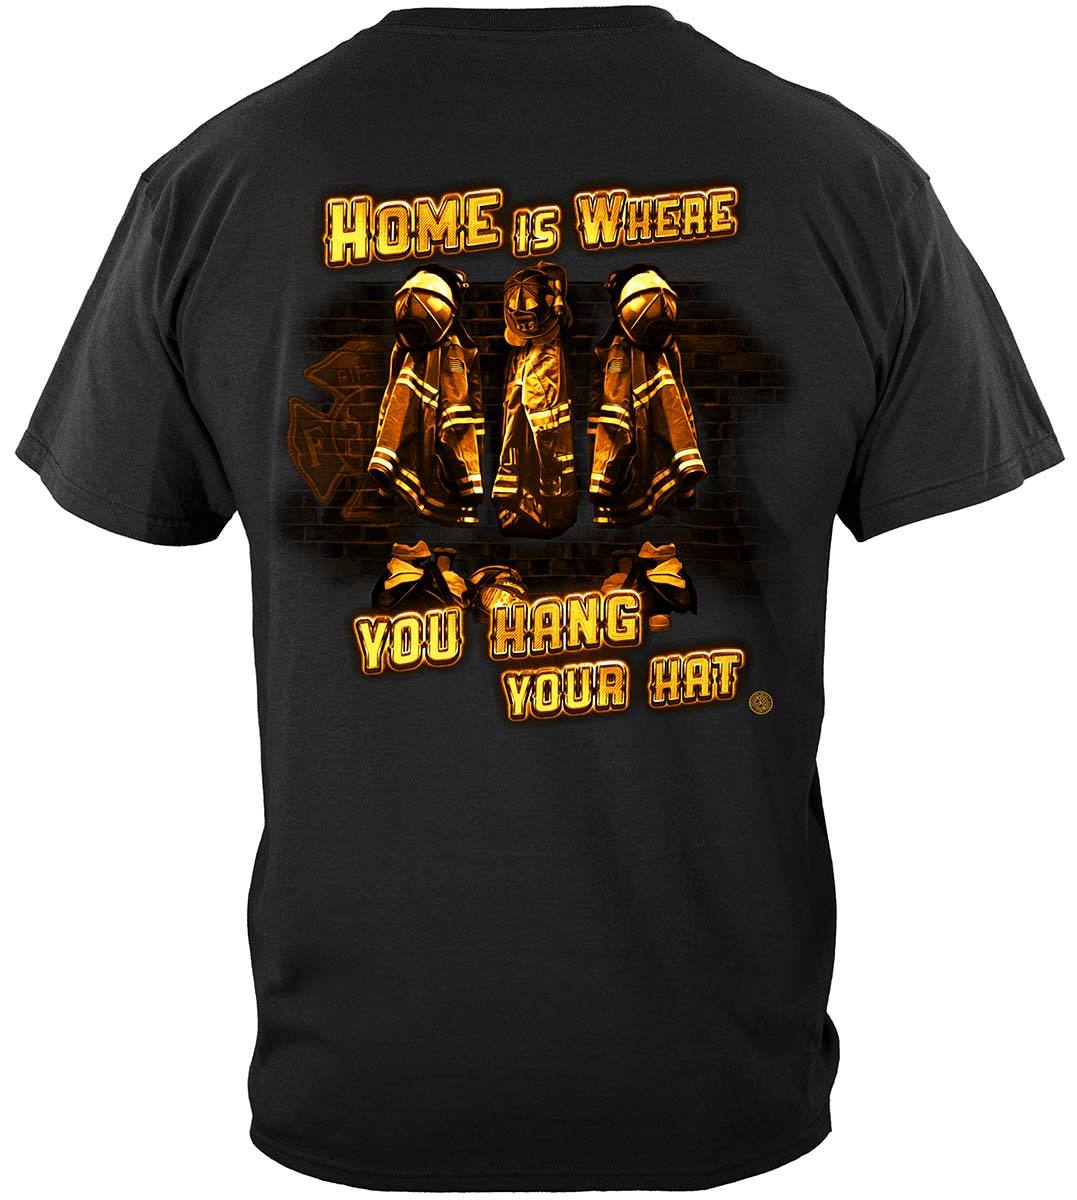 Home Is Where You Hang Your Hat Firefighter Premium Hooded Sweat Shirt